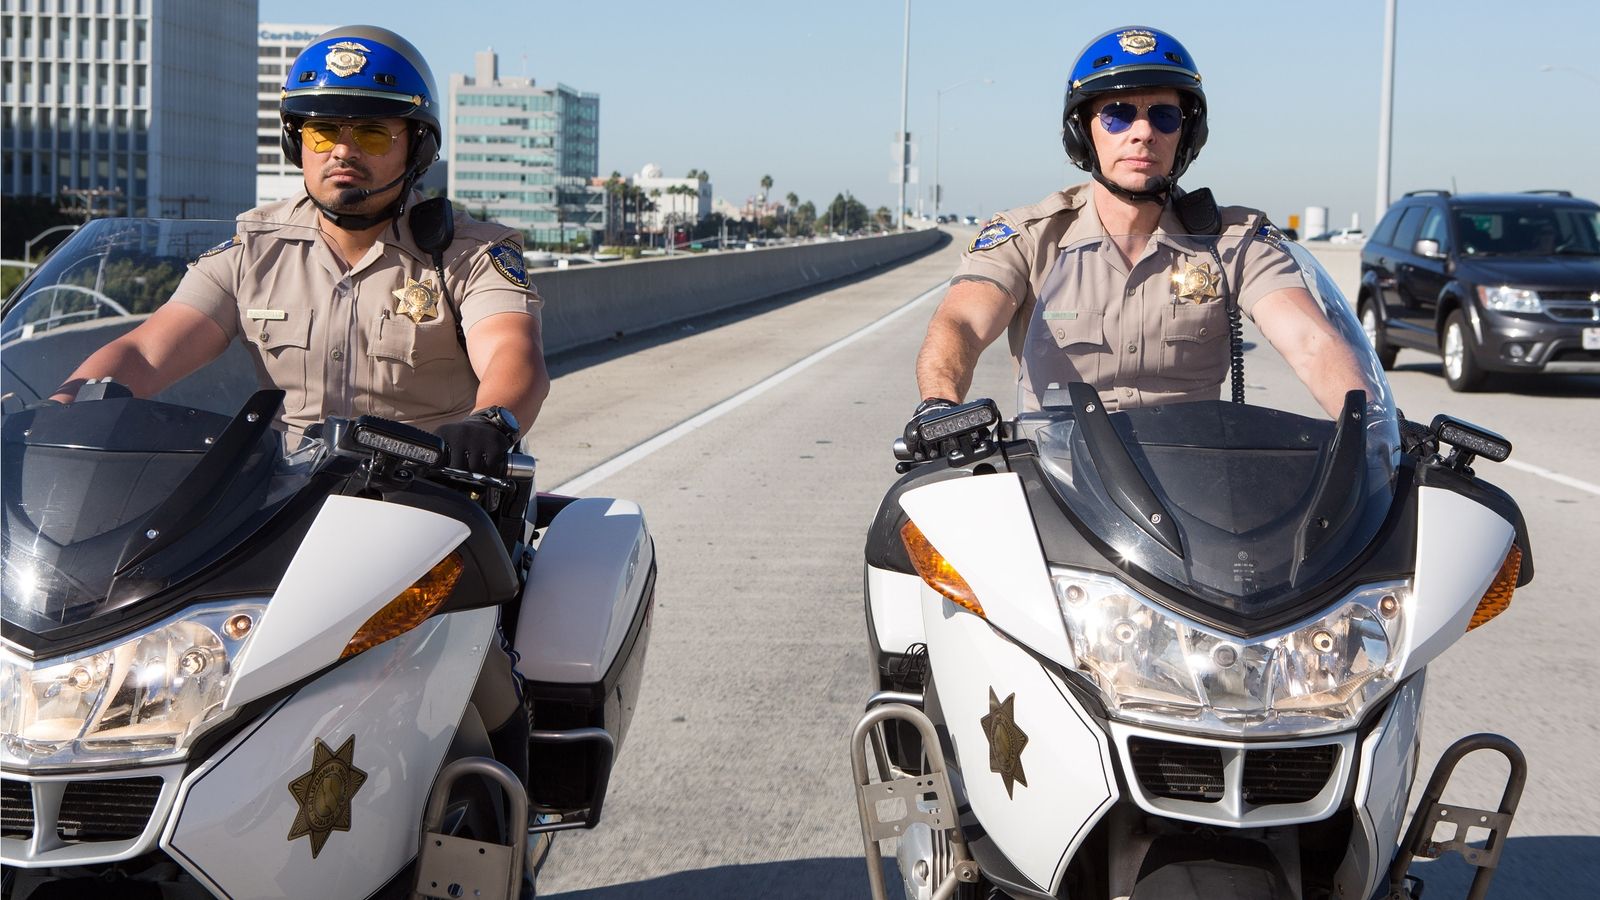 CHIPS movie review, CHIPS is just another mediocre remake